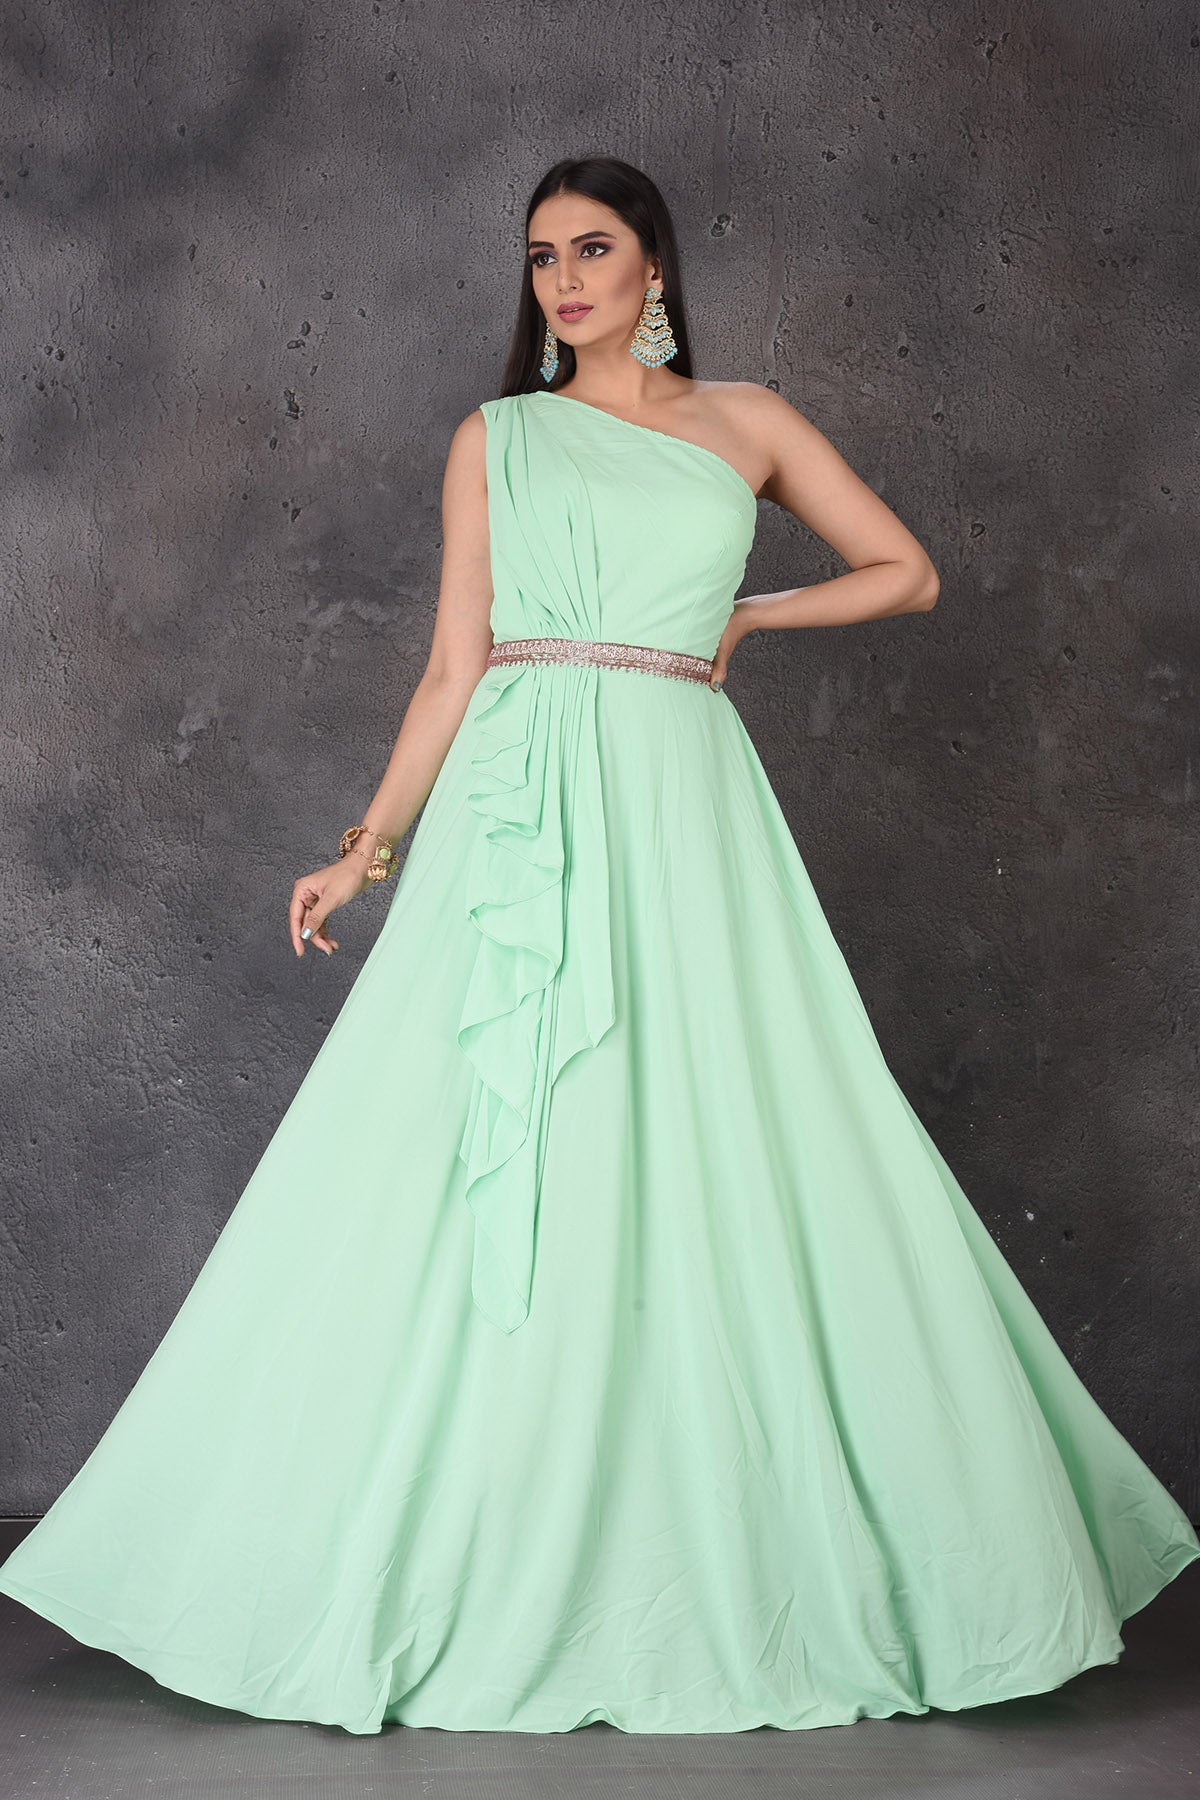 Party Wear Mint Green /Peach Cold Shoulder Gown at Rs 9000 in New Delhi |  ID: 20967059155